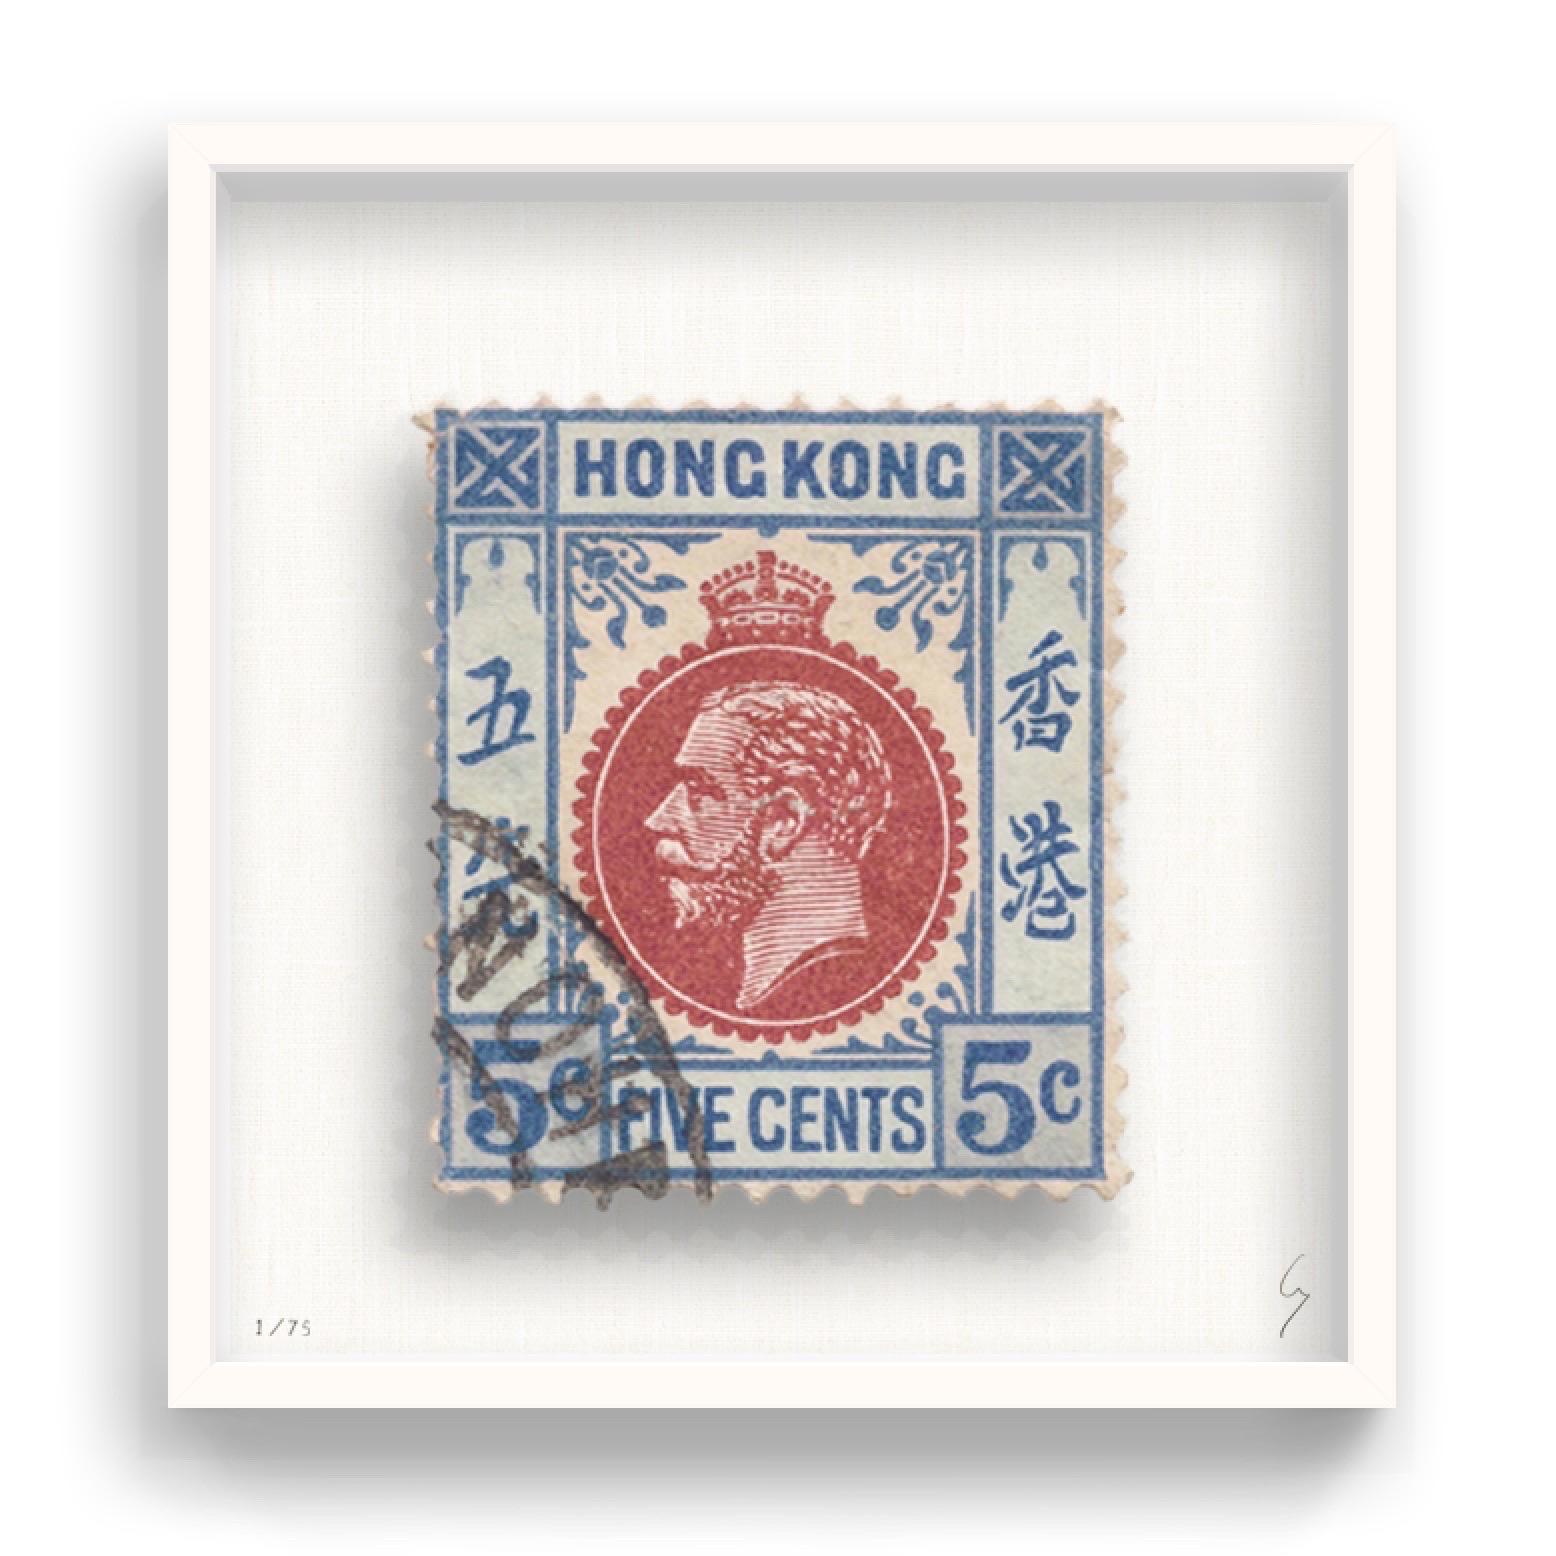 Guy Gee, Hong Kong (medium)

Hand-engraved print on 350gsm on G.F Smith card
53 x 56cm (20 4/5 x 22 2/5 in)
Frame included 
Edition of 75 

Each artwork by Guy had been digitally reimagined from an original postage stamp. Cut out and finished by